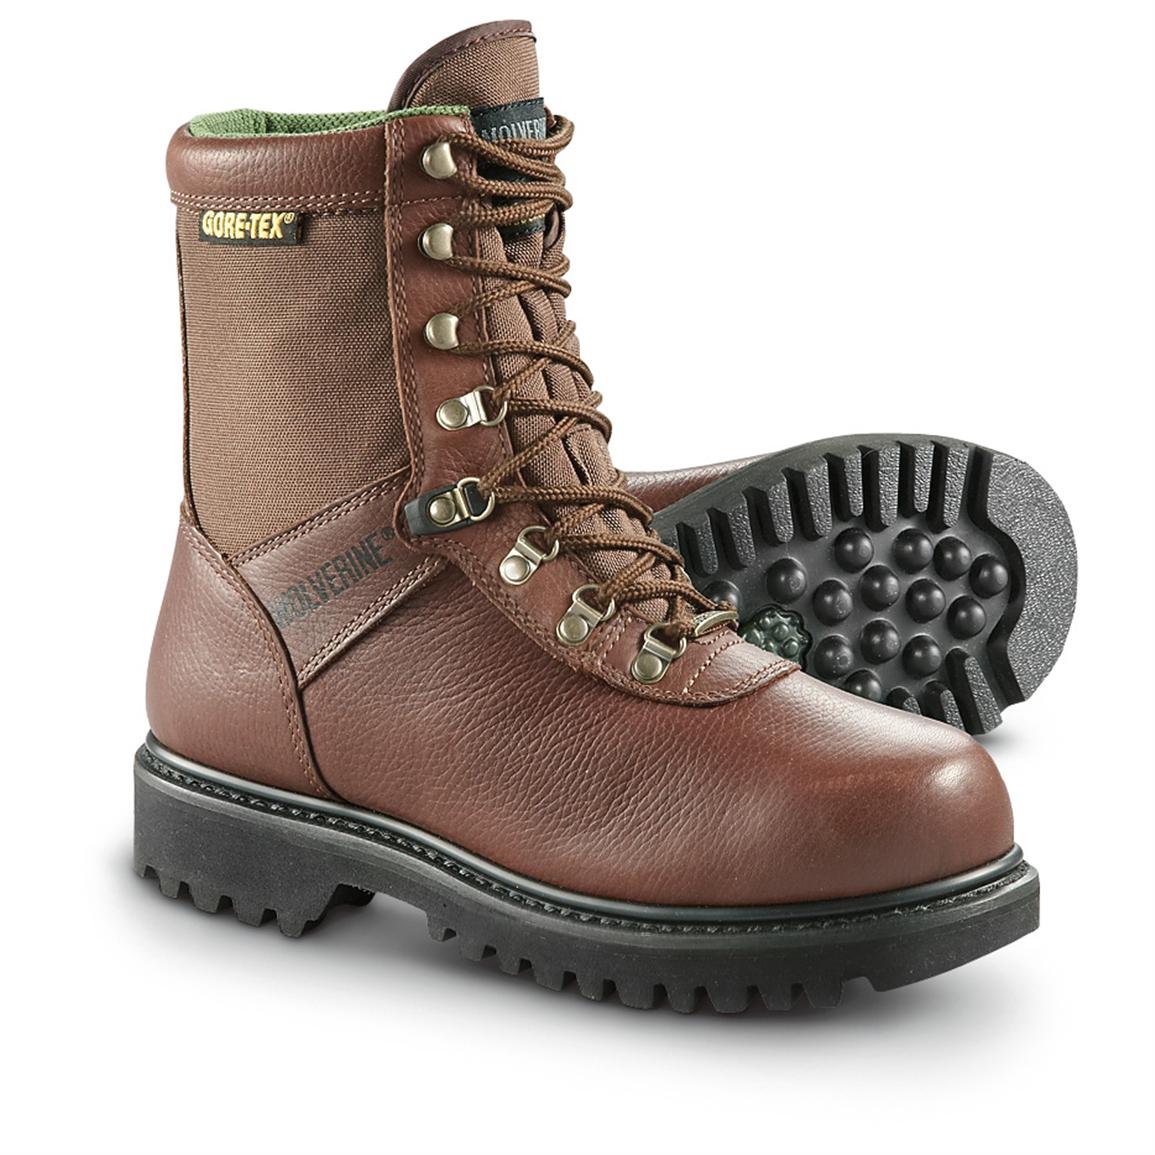 Gore Tex Wolverine Boots | vlr.eng.br